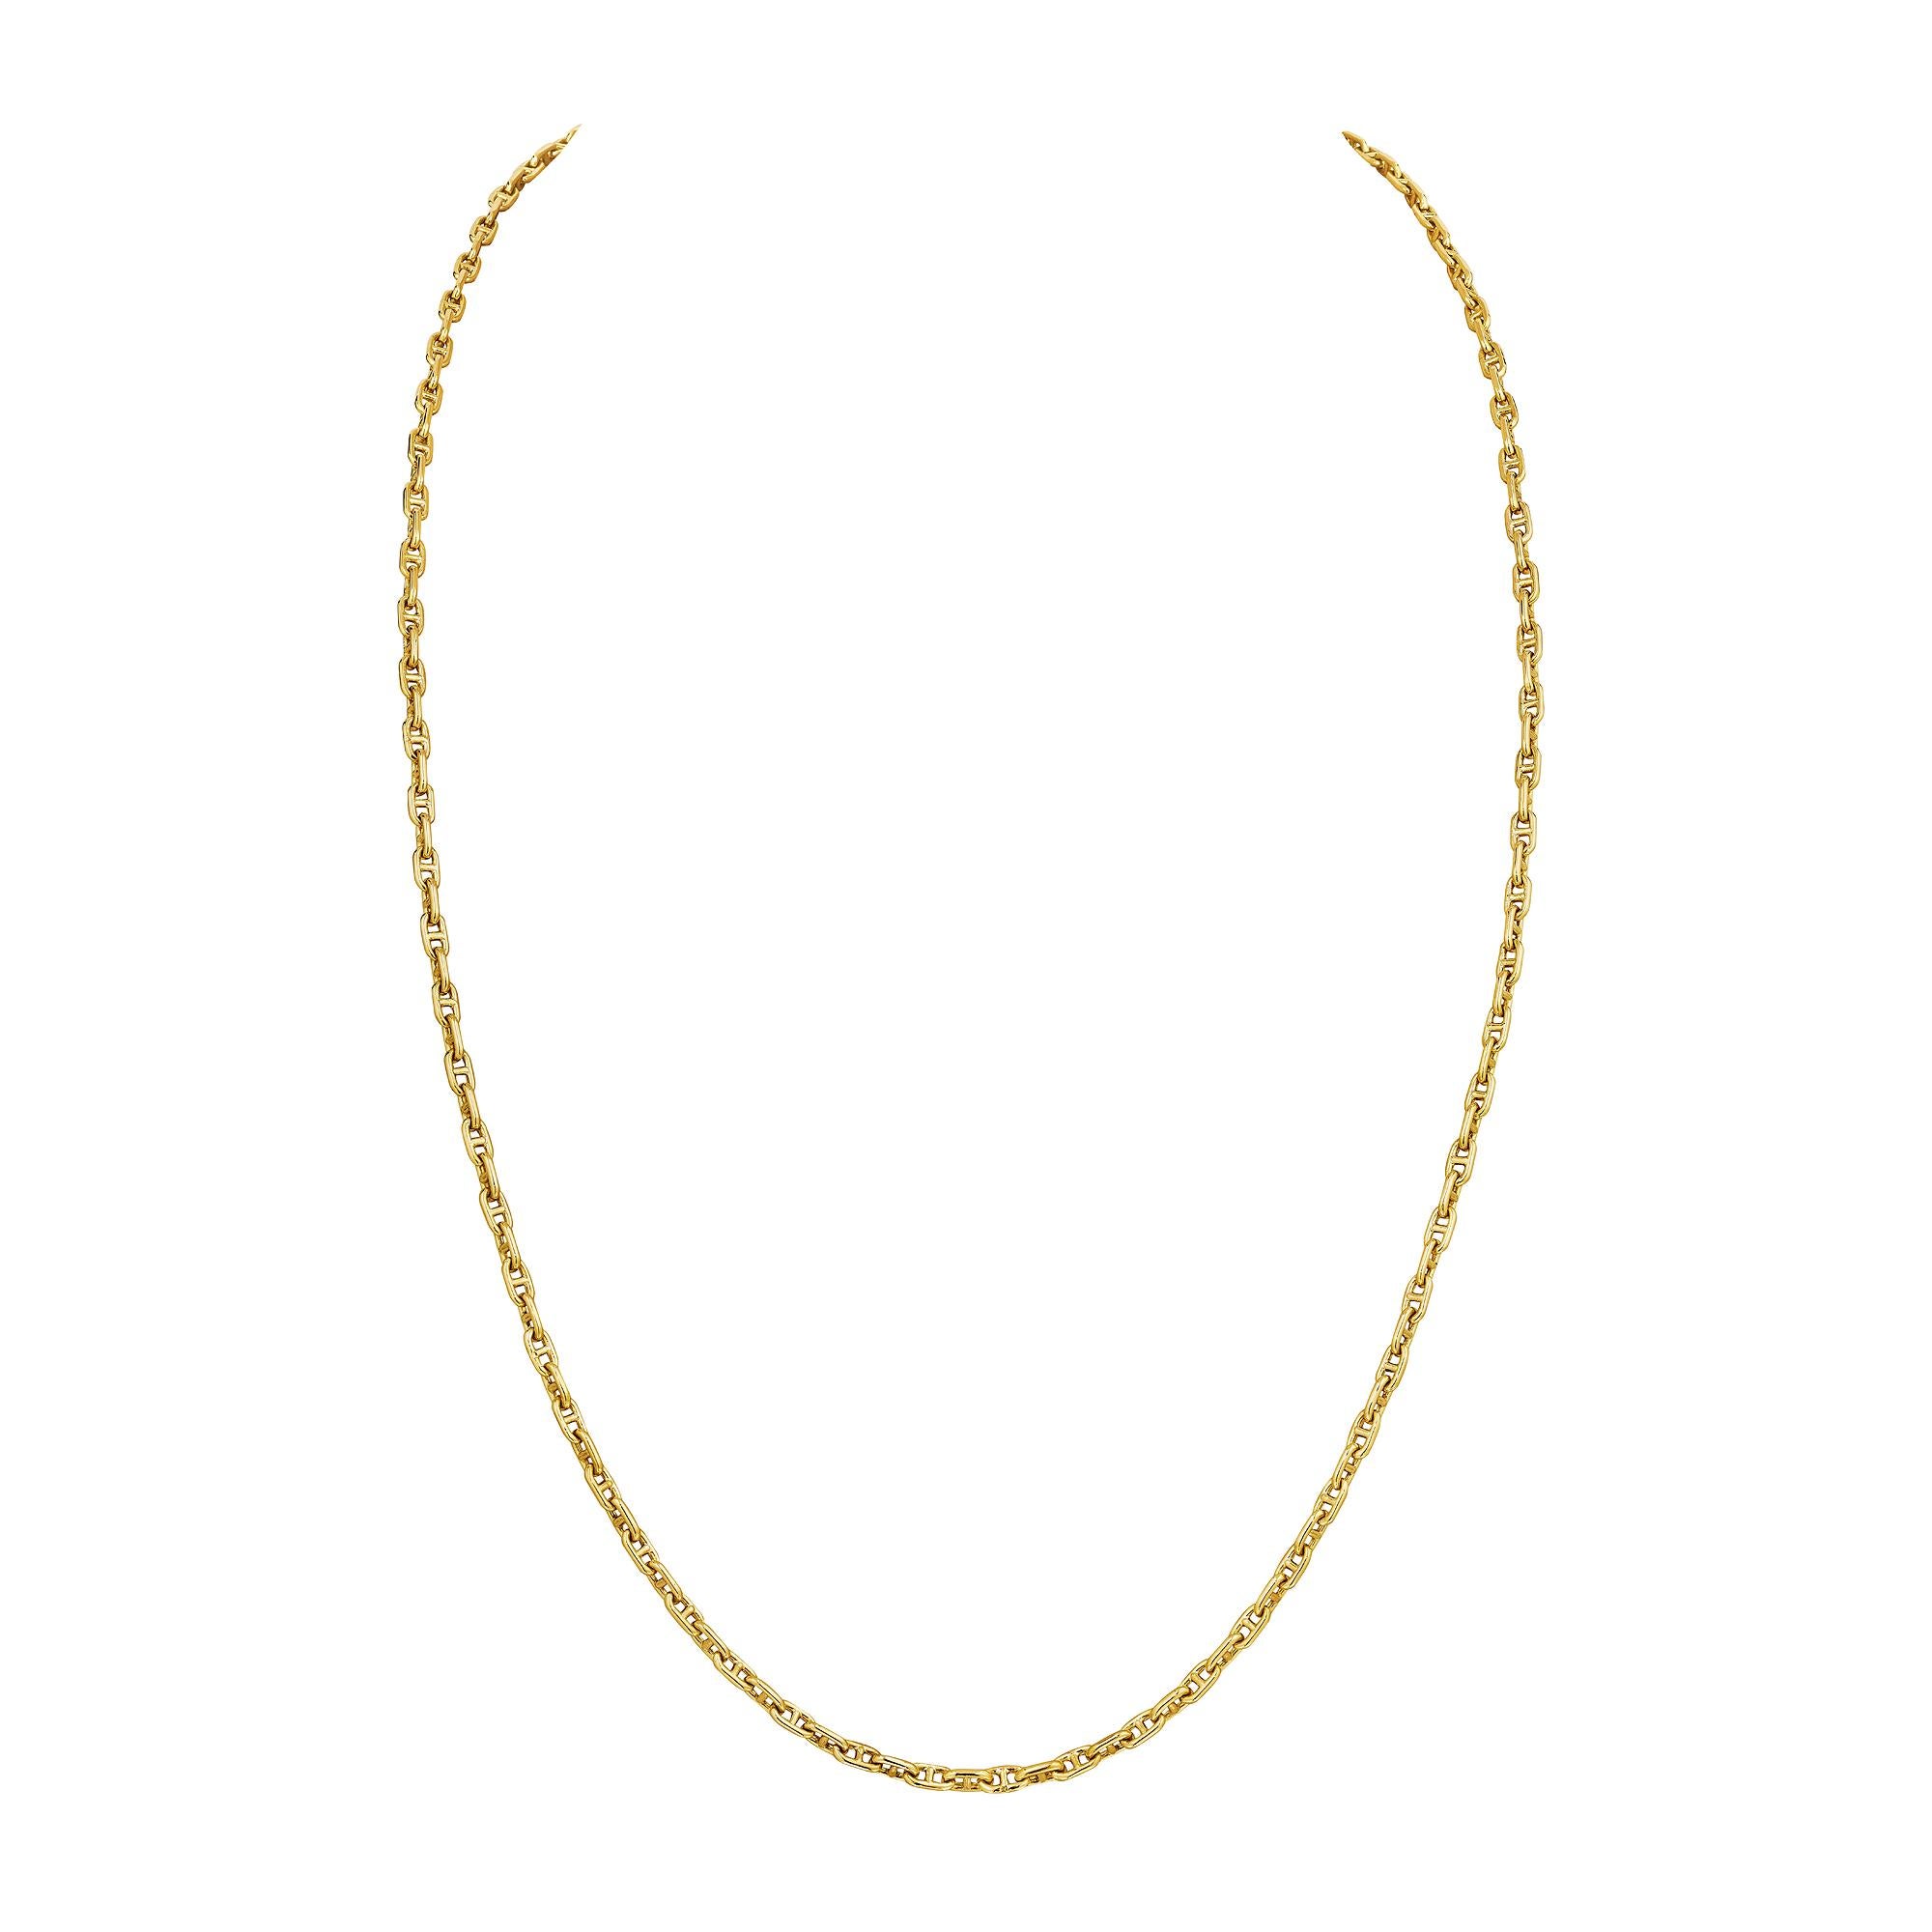 Hermes Paris Modernist 'Chain D'Ancre' Long Toggle Link Gold Modernist Necklace In Excellent Condition For Sale In Greenwich, CT